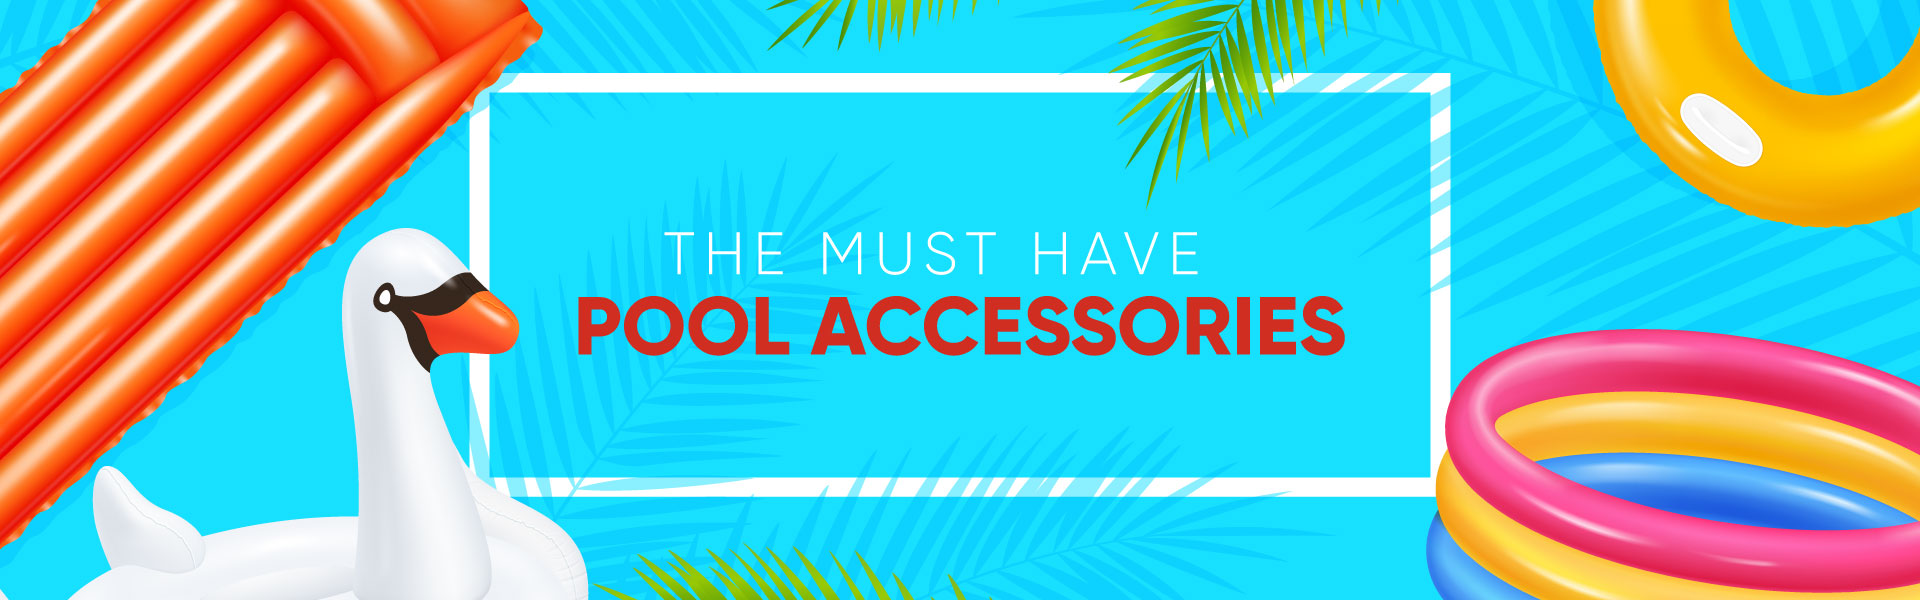 must have pool accessories for family swimming pool